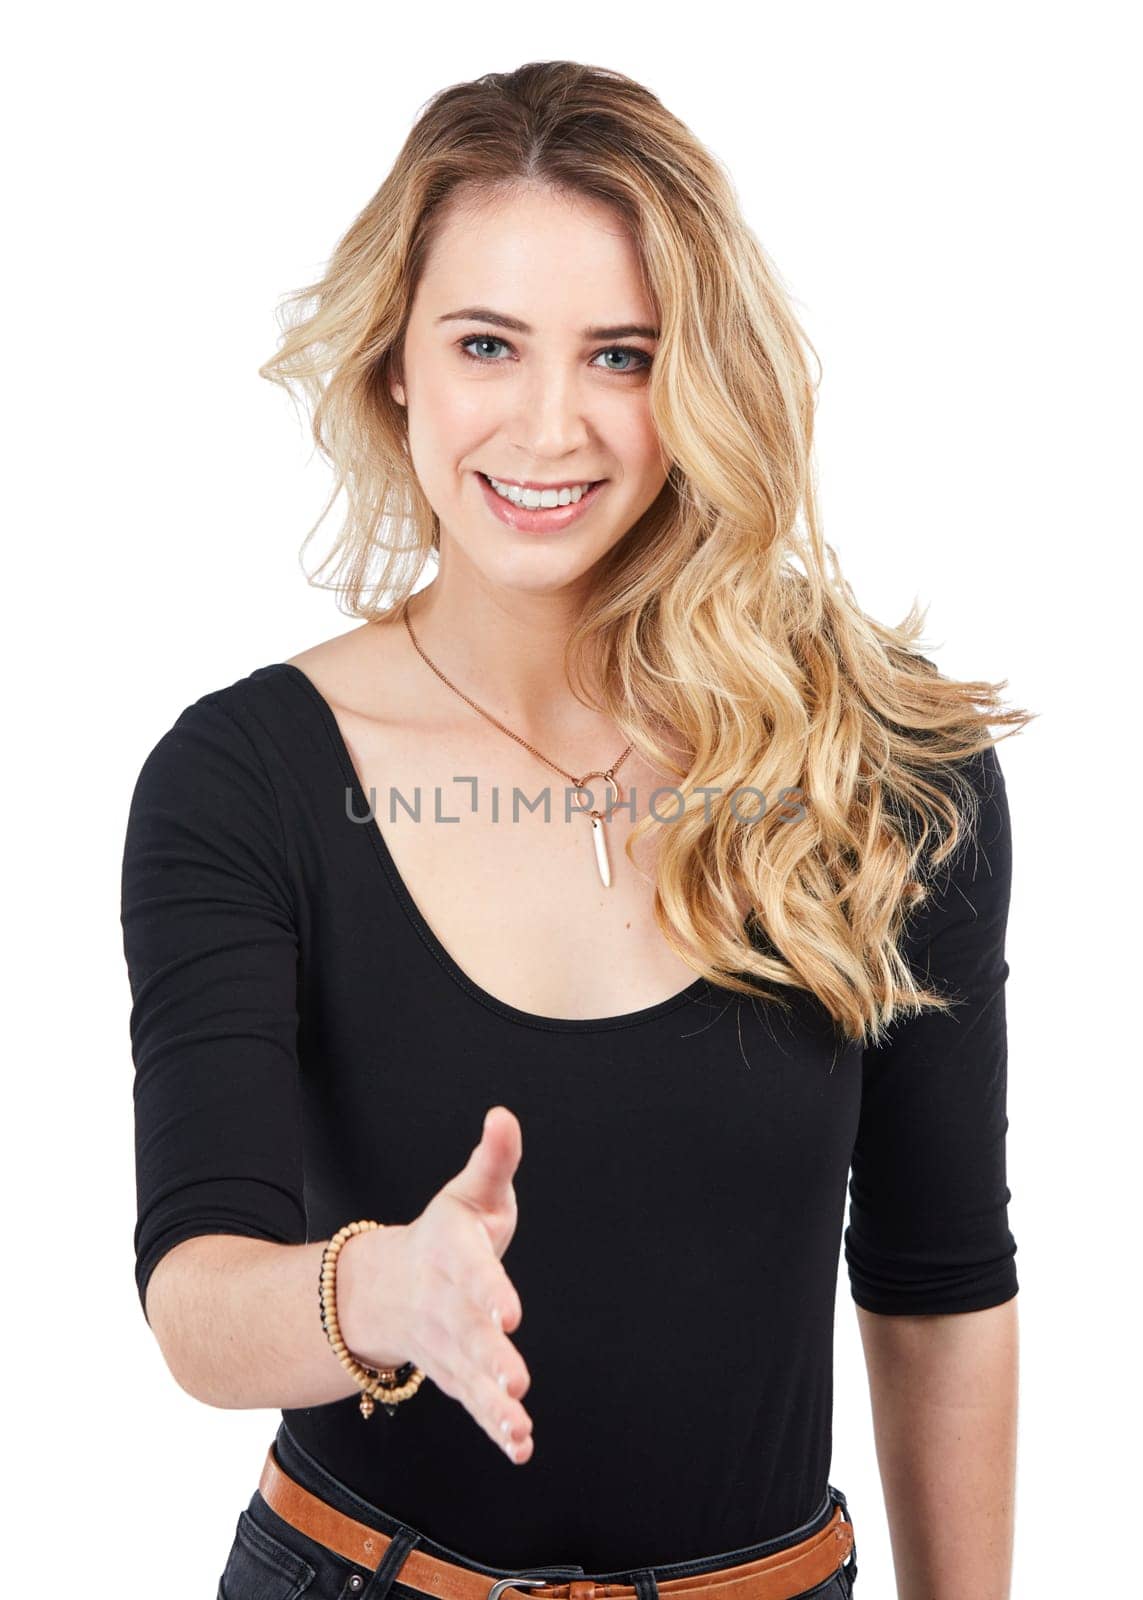 Handshake, welcome or hello with woman in portrait, introduction and greeting isolated on white background. Thank you, trust and communication with shaking hands and smile, happy woman and solidarity.